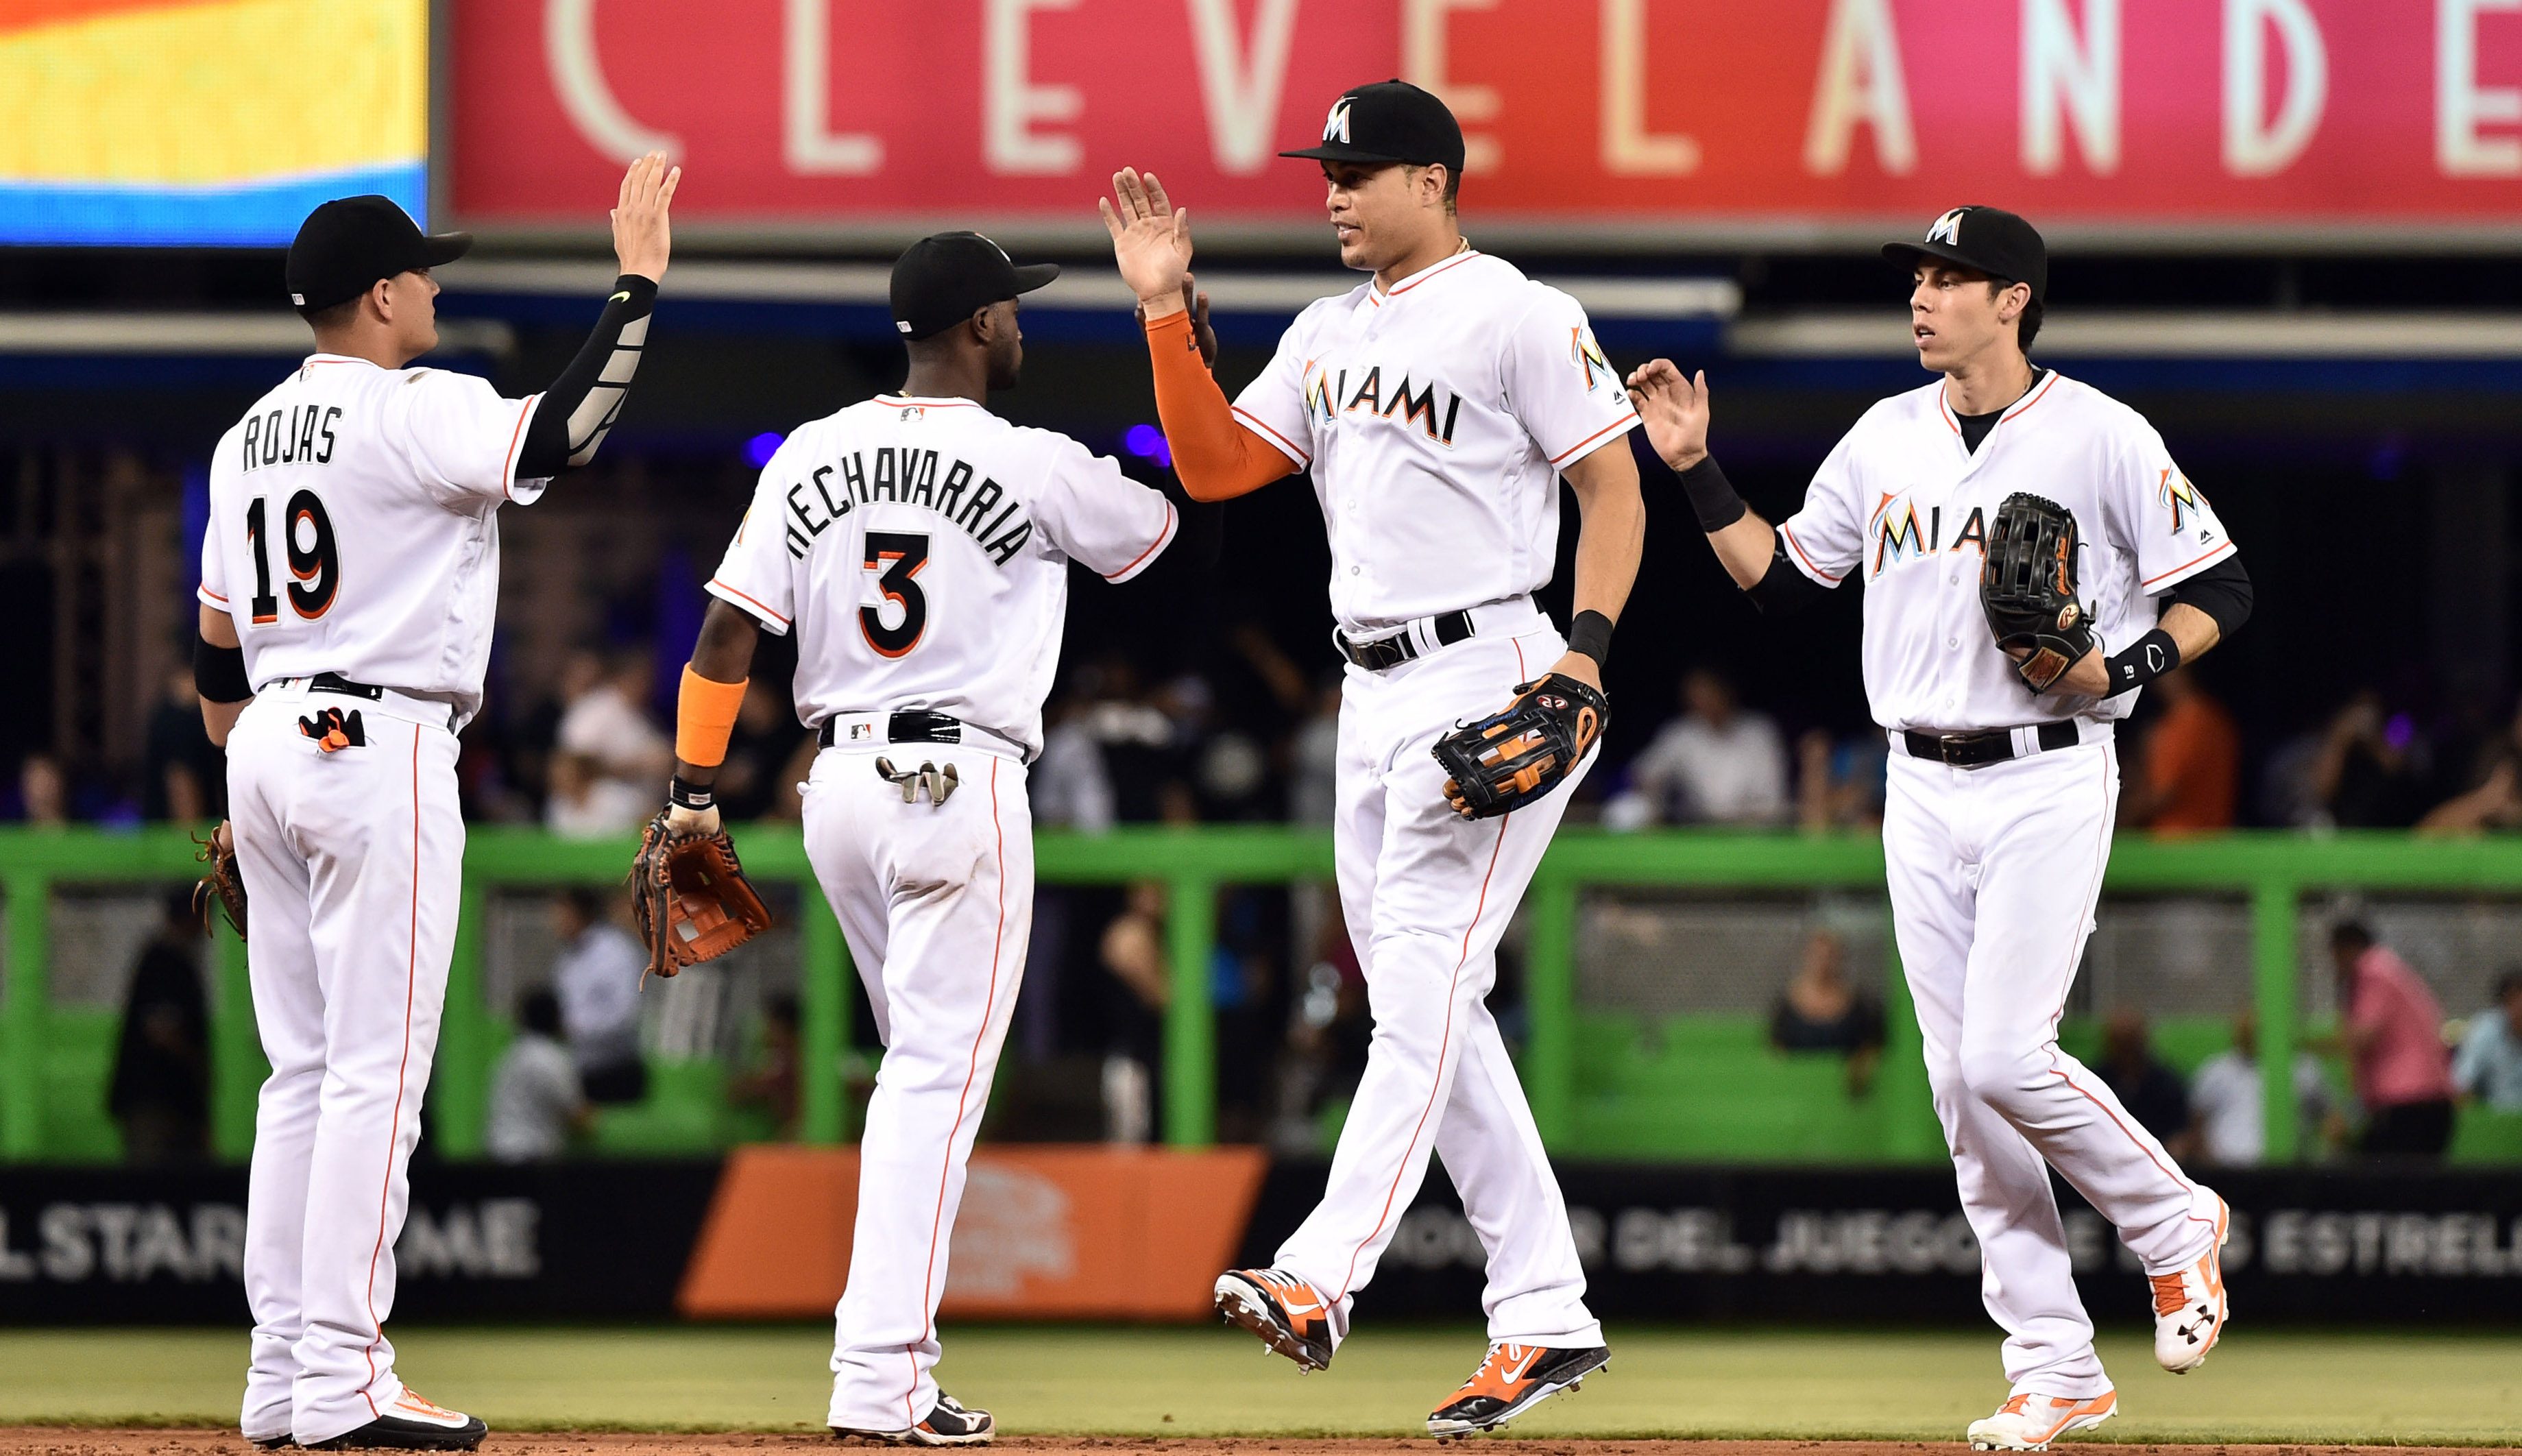 Miami Marlins 2016 Player of the Year: Christian Yelich